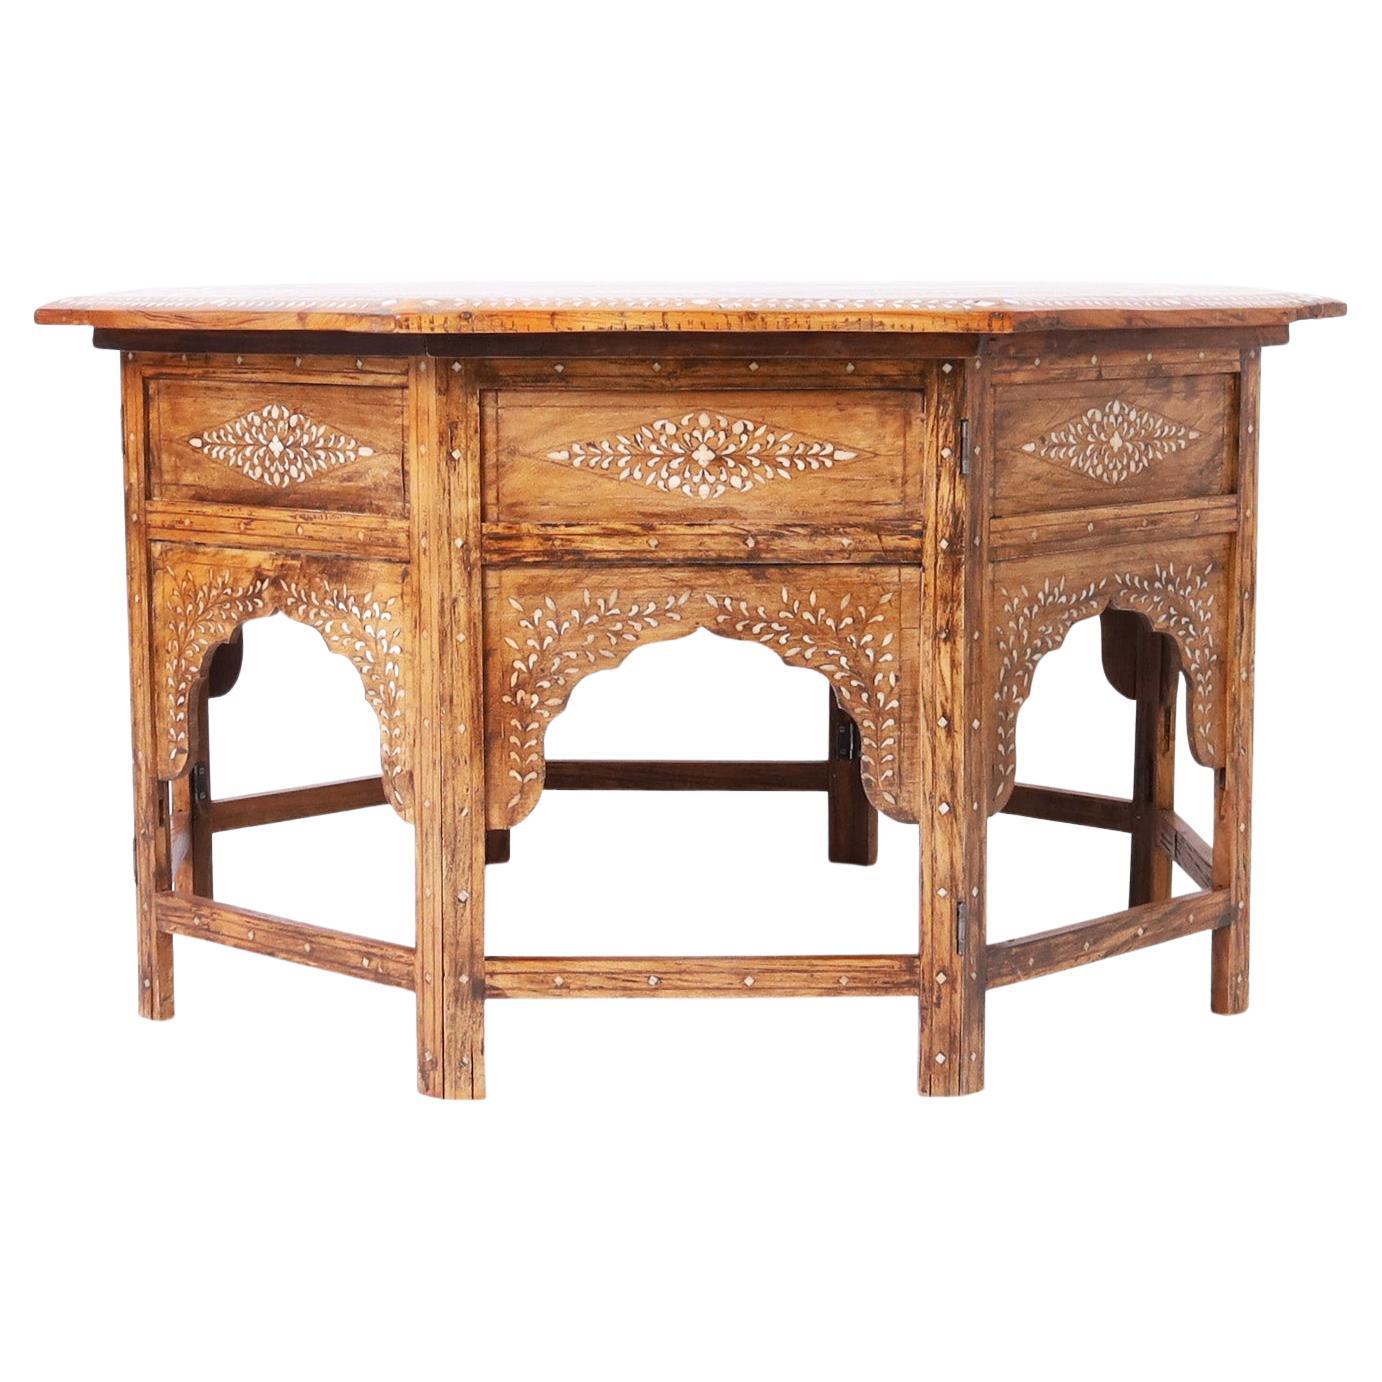 Impressive antique Moroccan coffee table crafted with walnut in an octagon form with elaborate graceful floral bone inlays on the top over a base with architecturally interesting arches between eight legs.